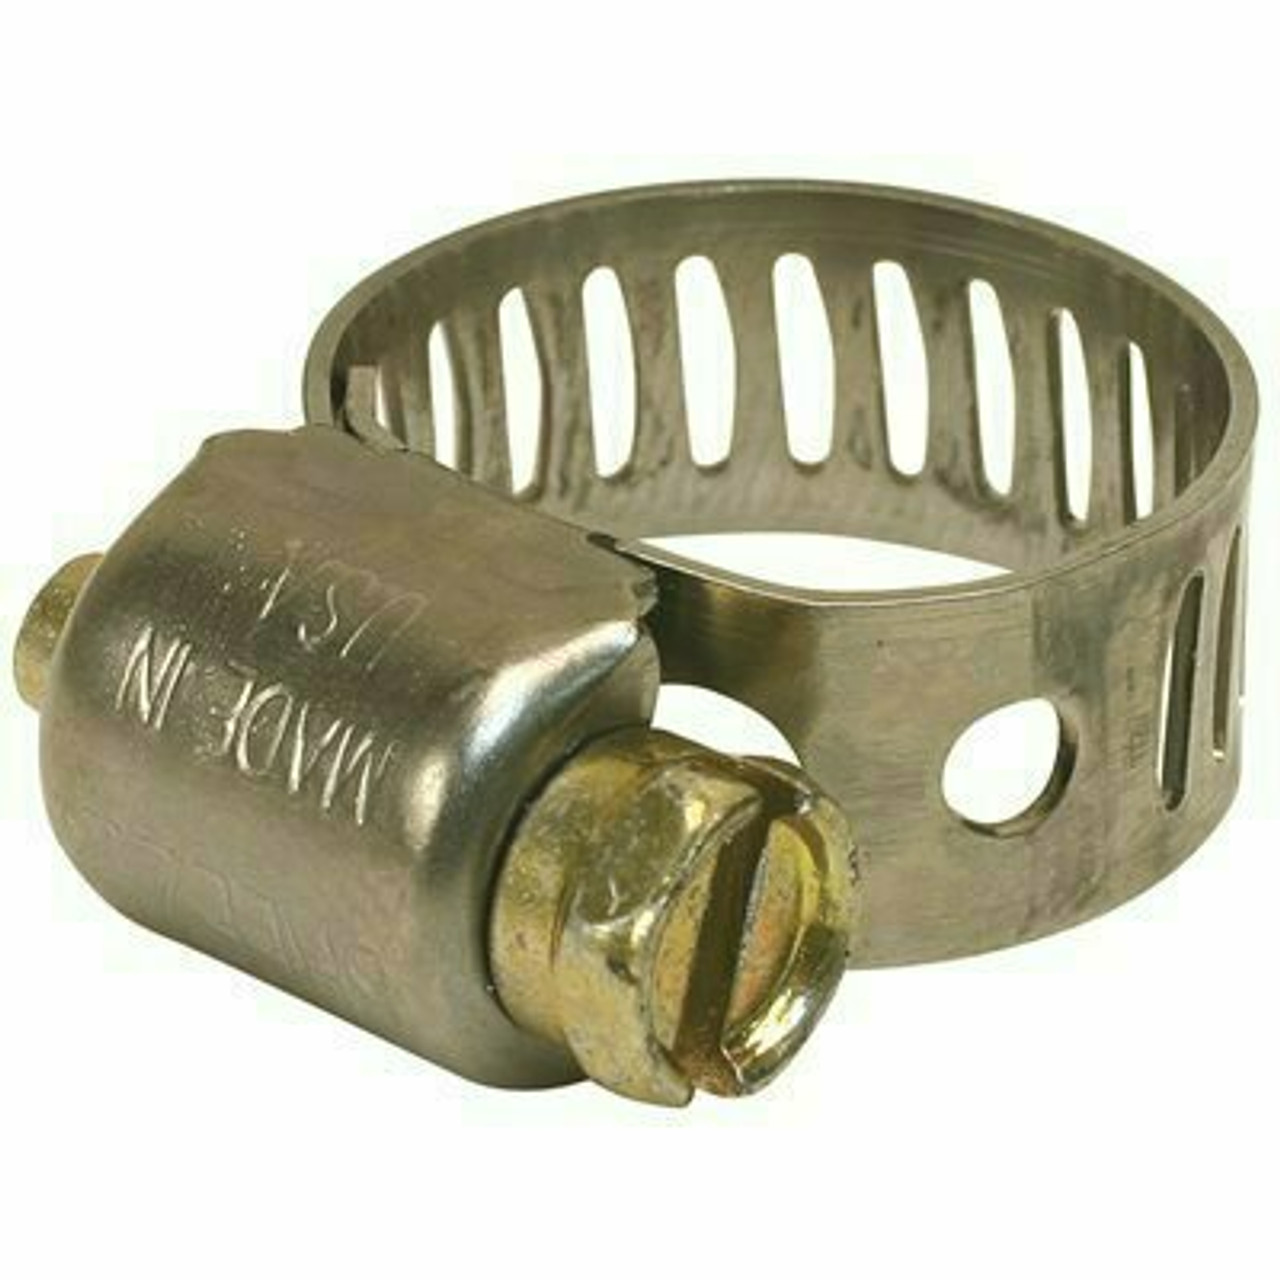 Breeze Clamp Hose Clamp 2-1/6 In. To 3 In.